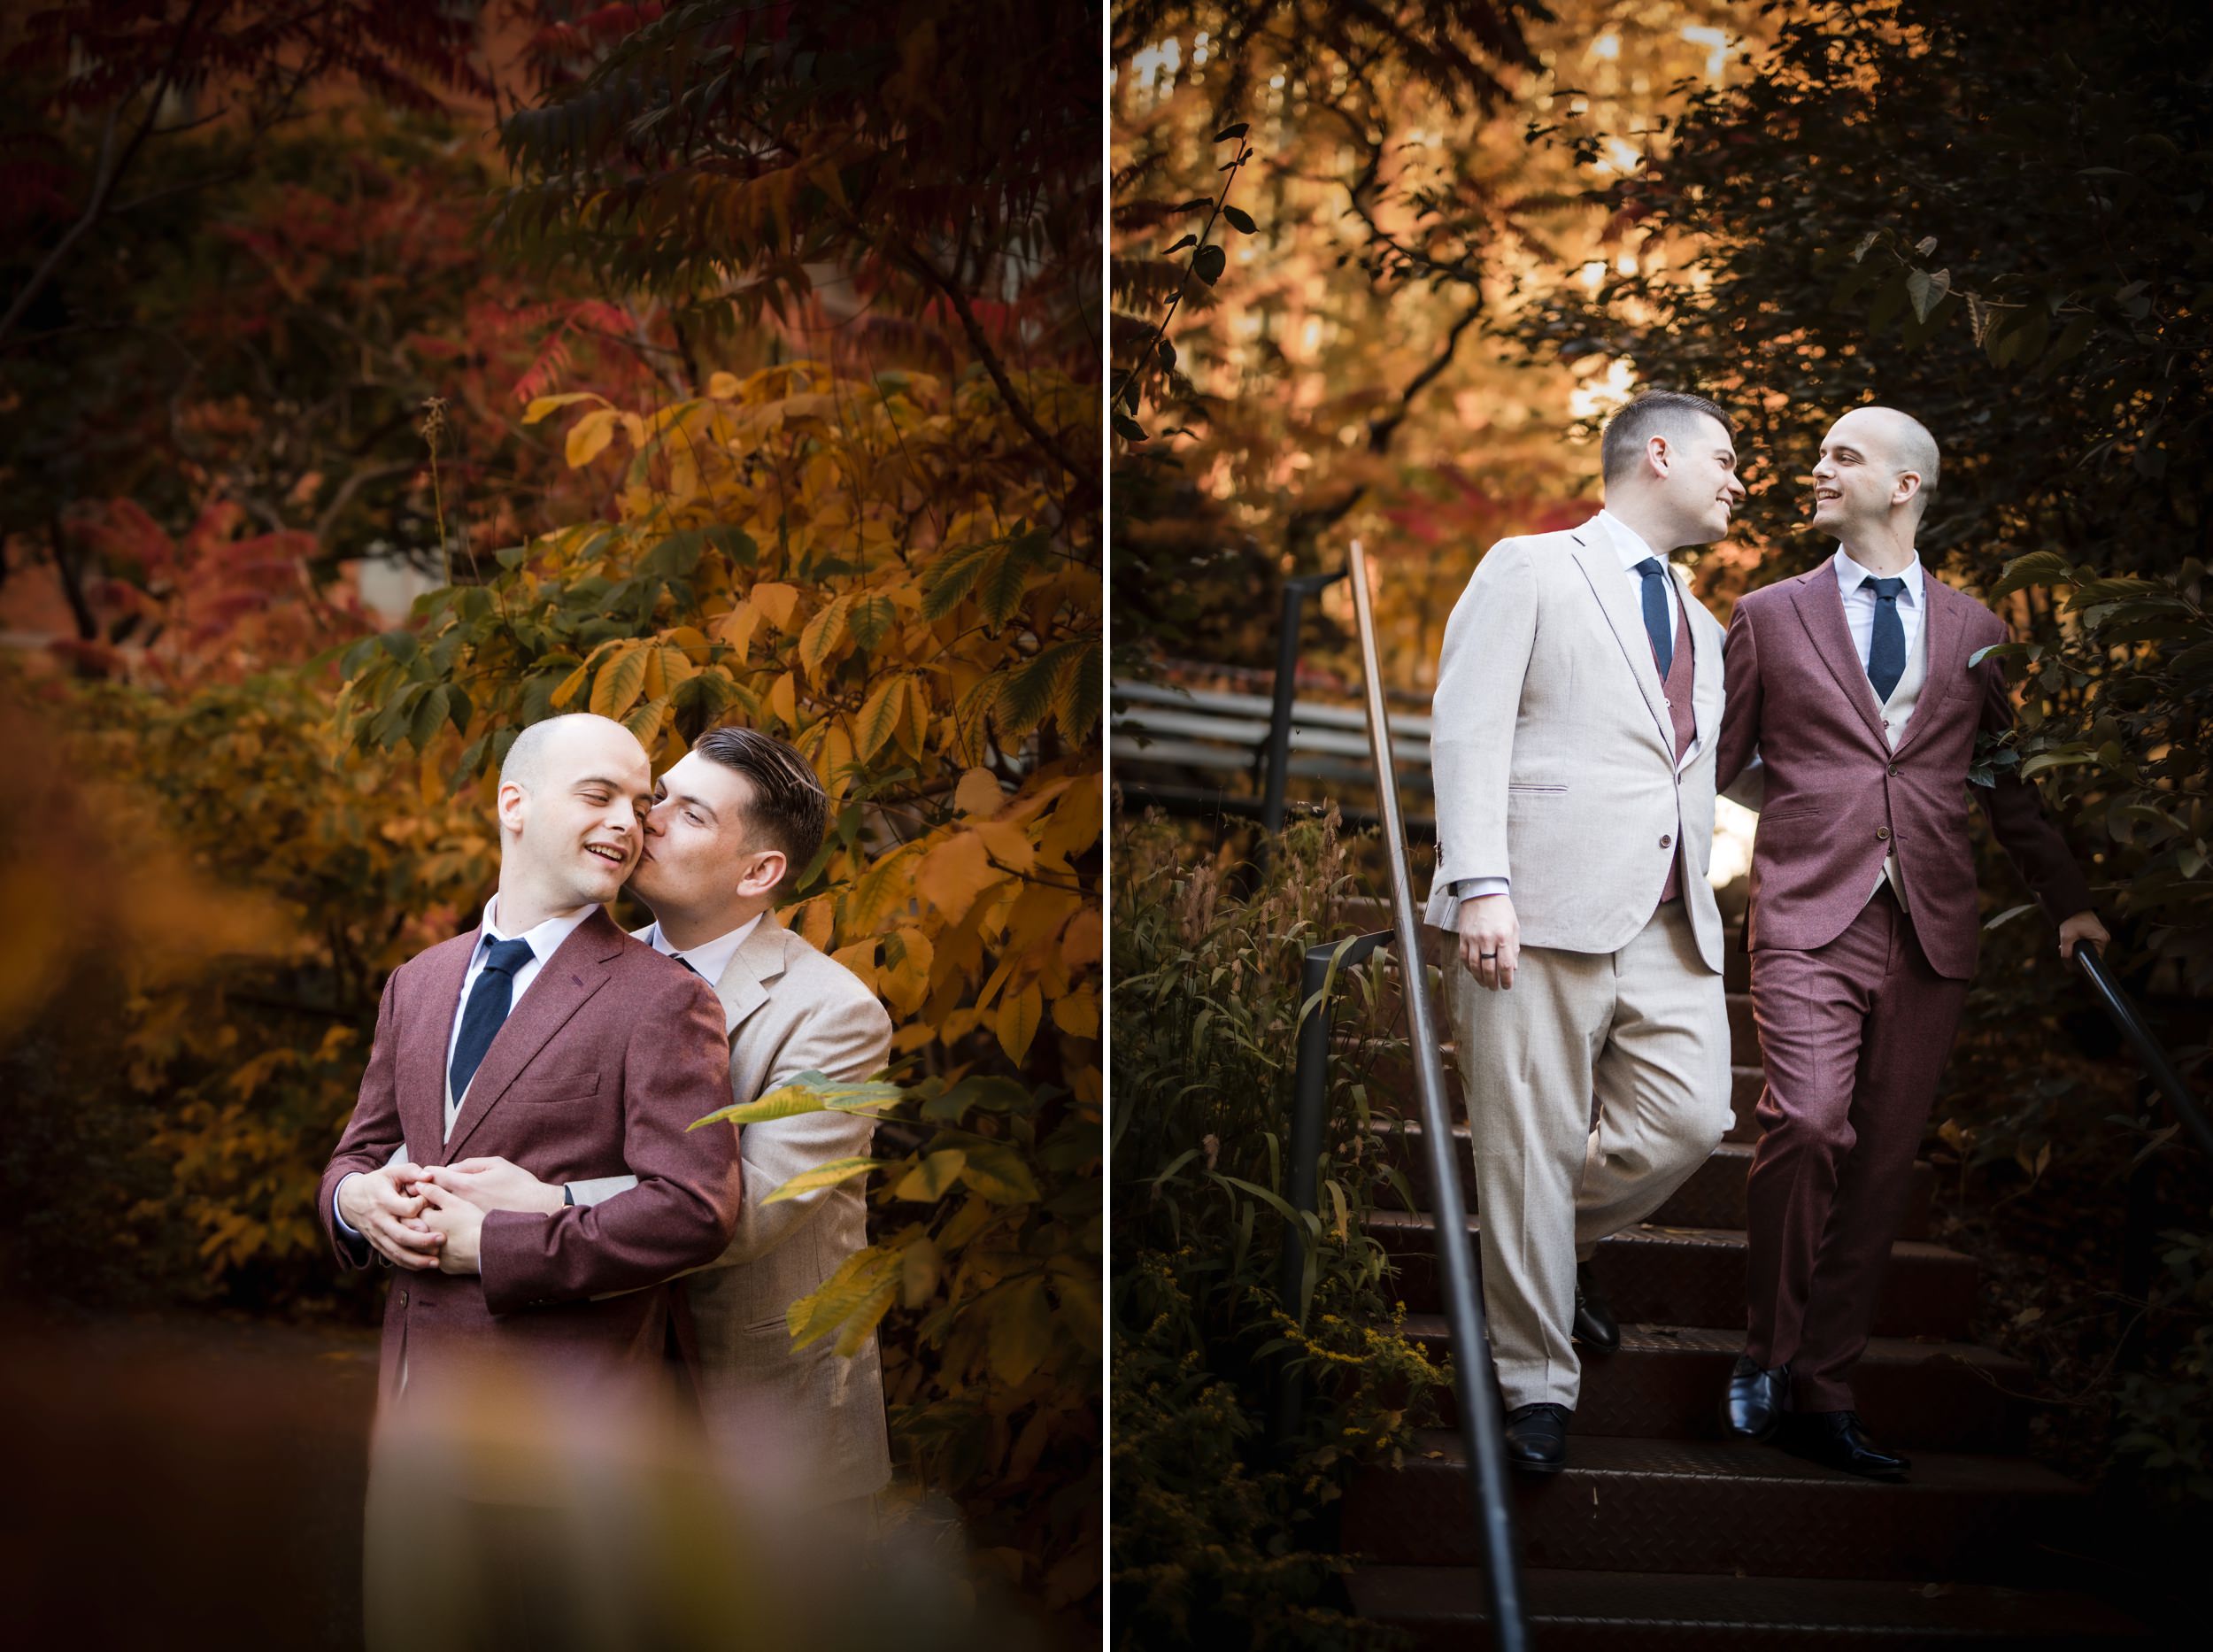 Tribeca Rooftop wedding portraits in the fall with beautiful fall foliage